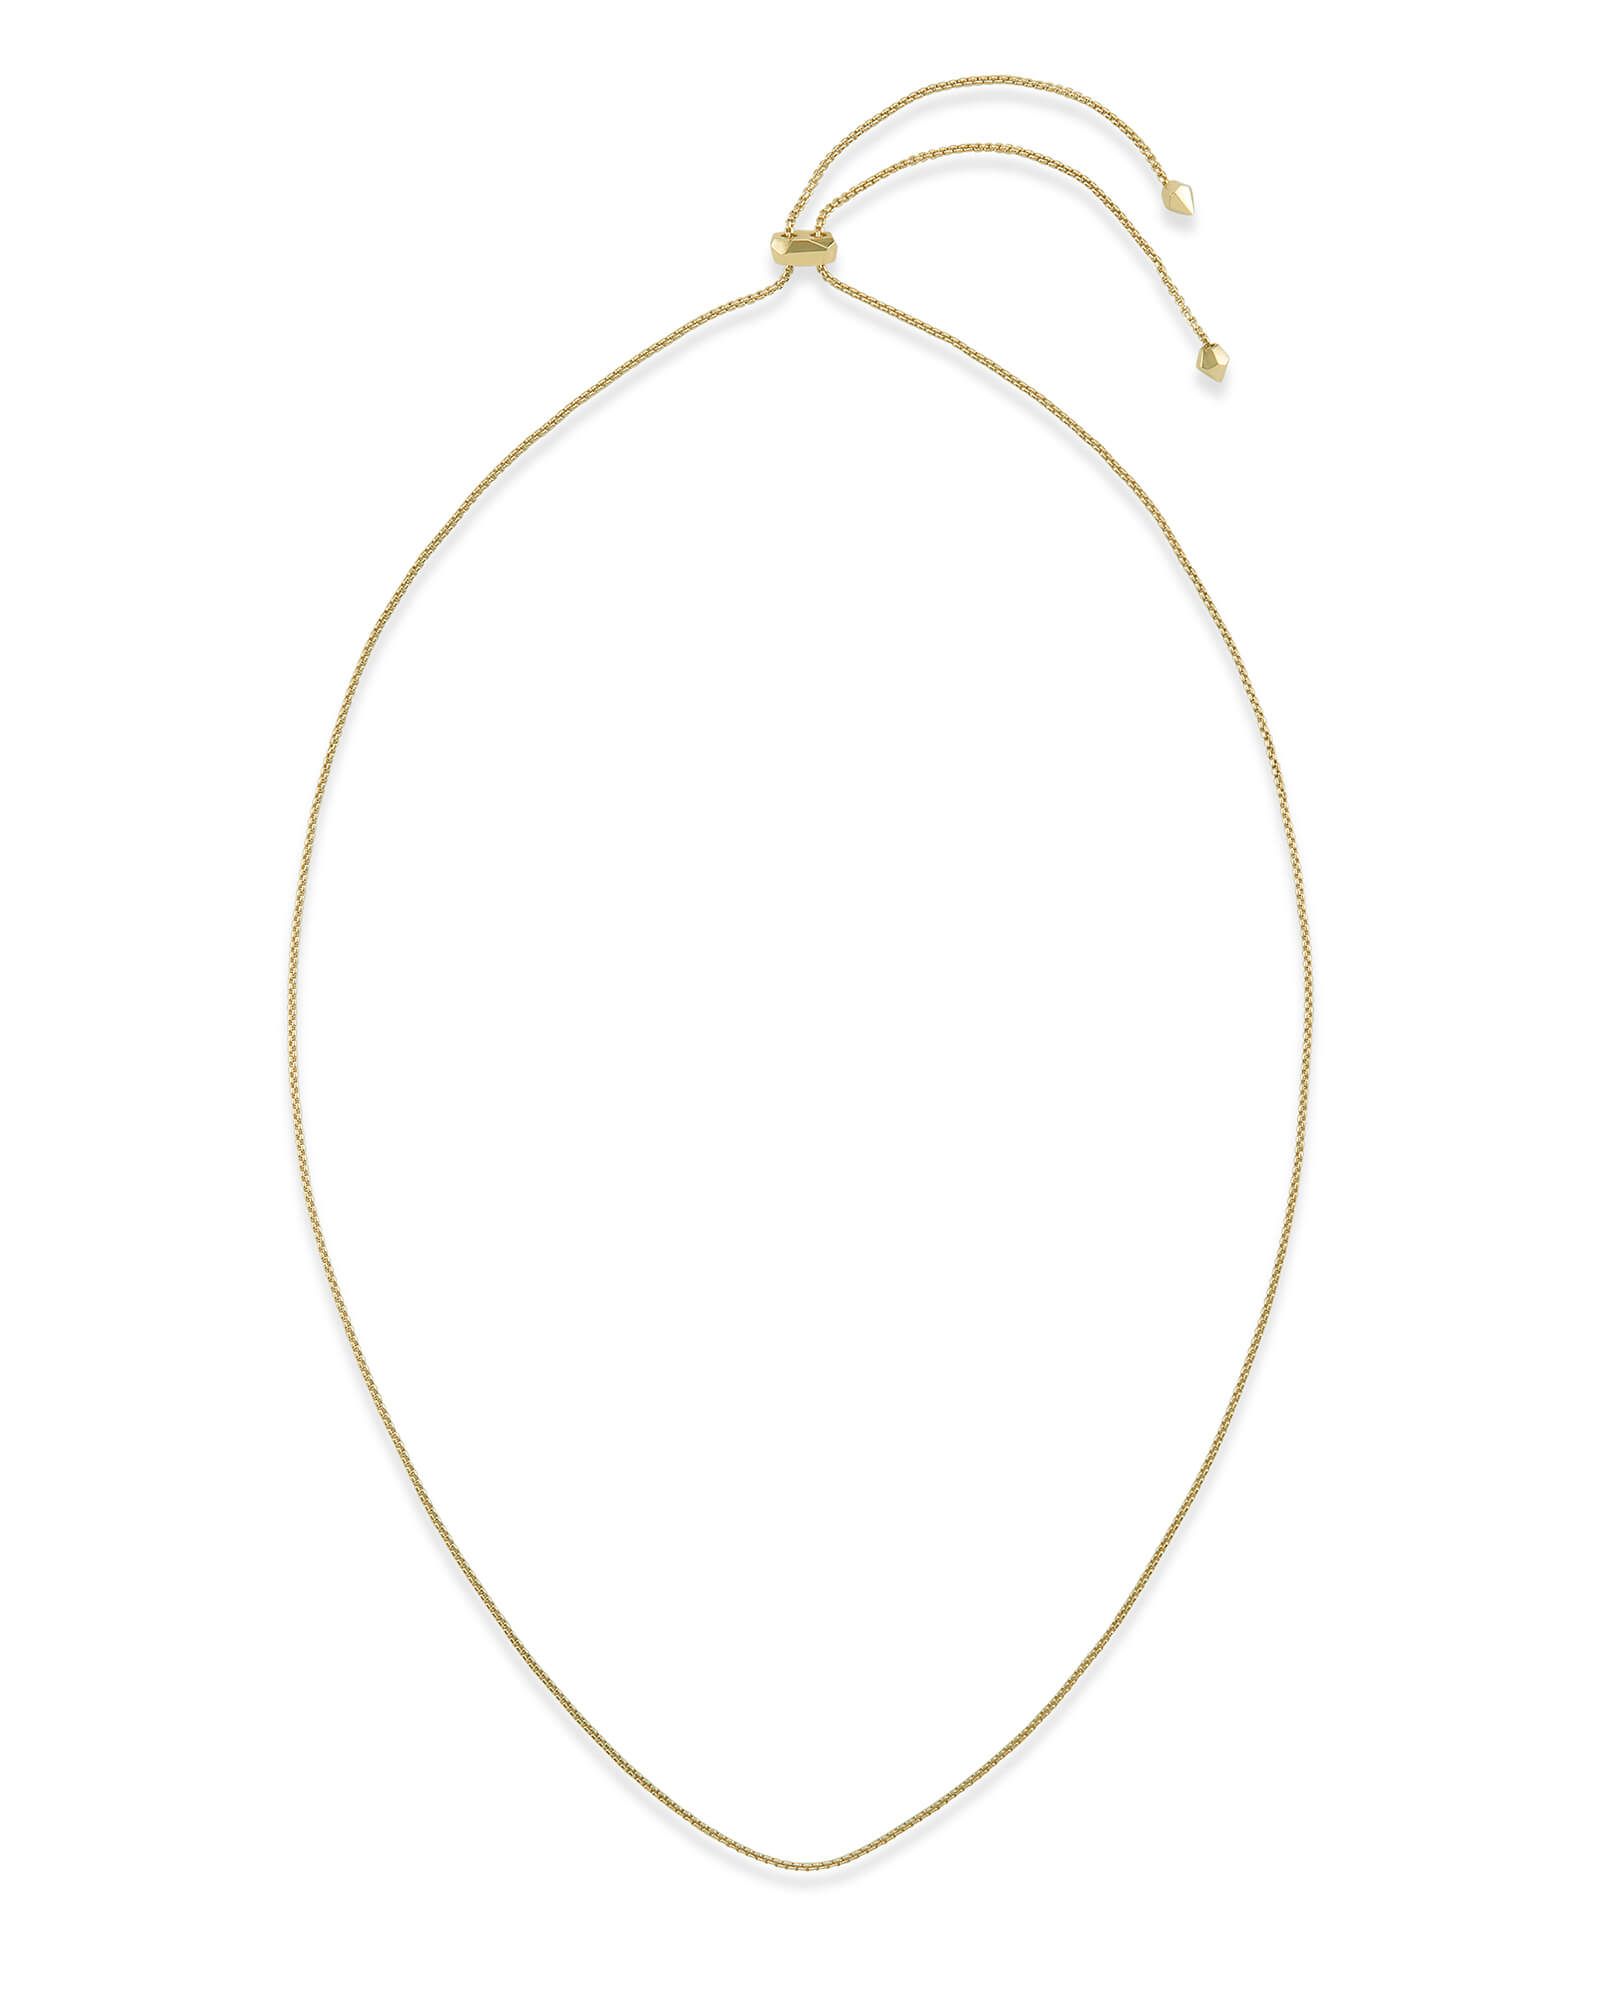 Thin Adjustable Chain Necklace in Gold | Kendra Scott